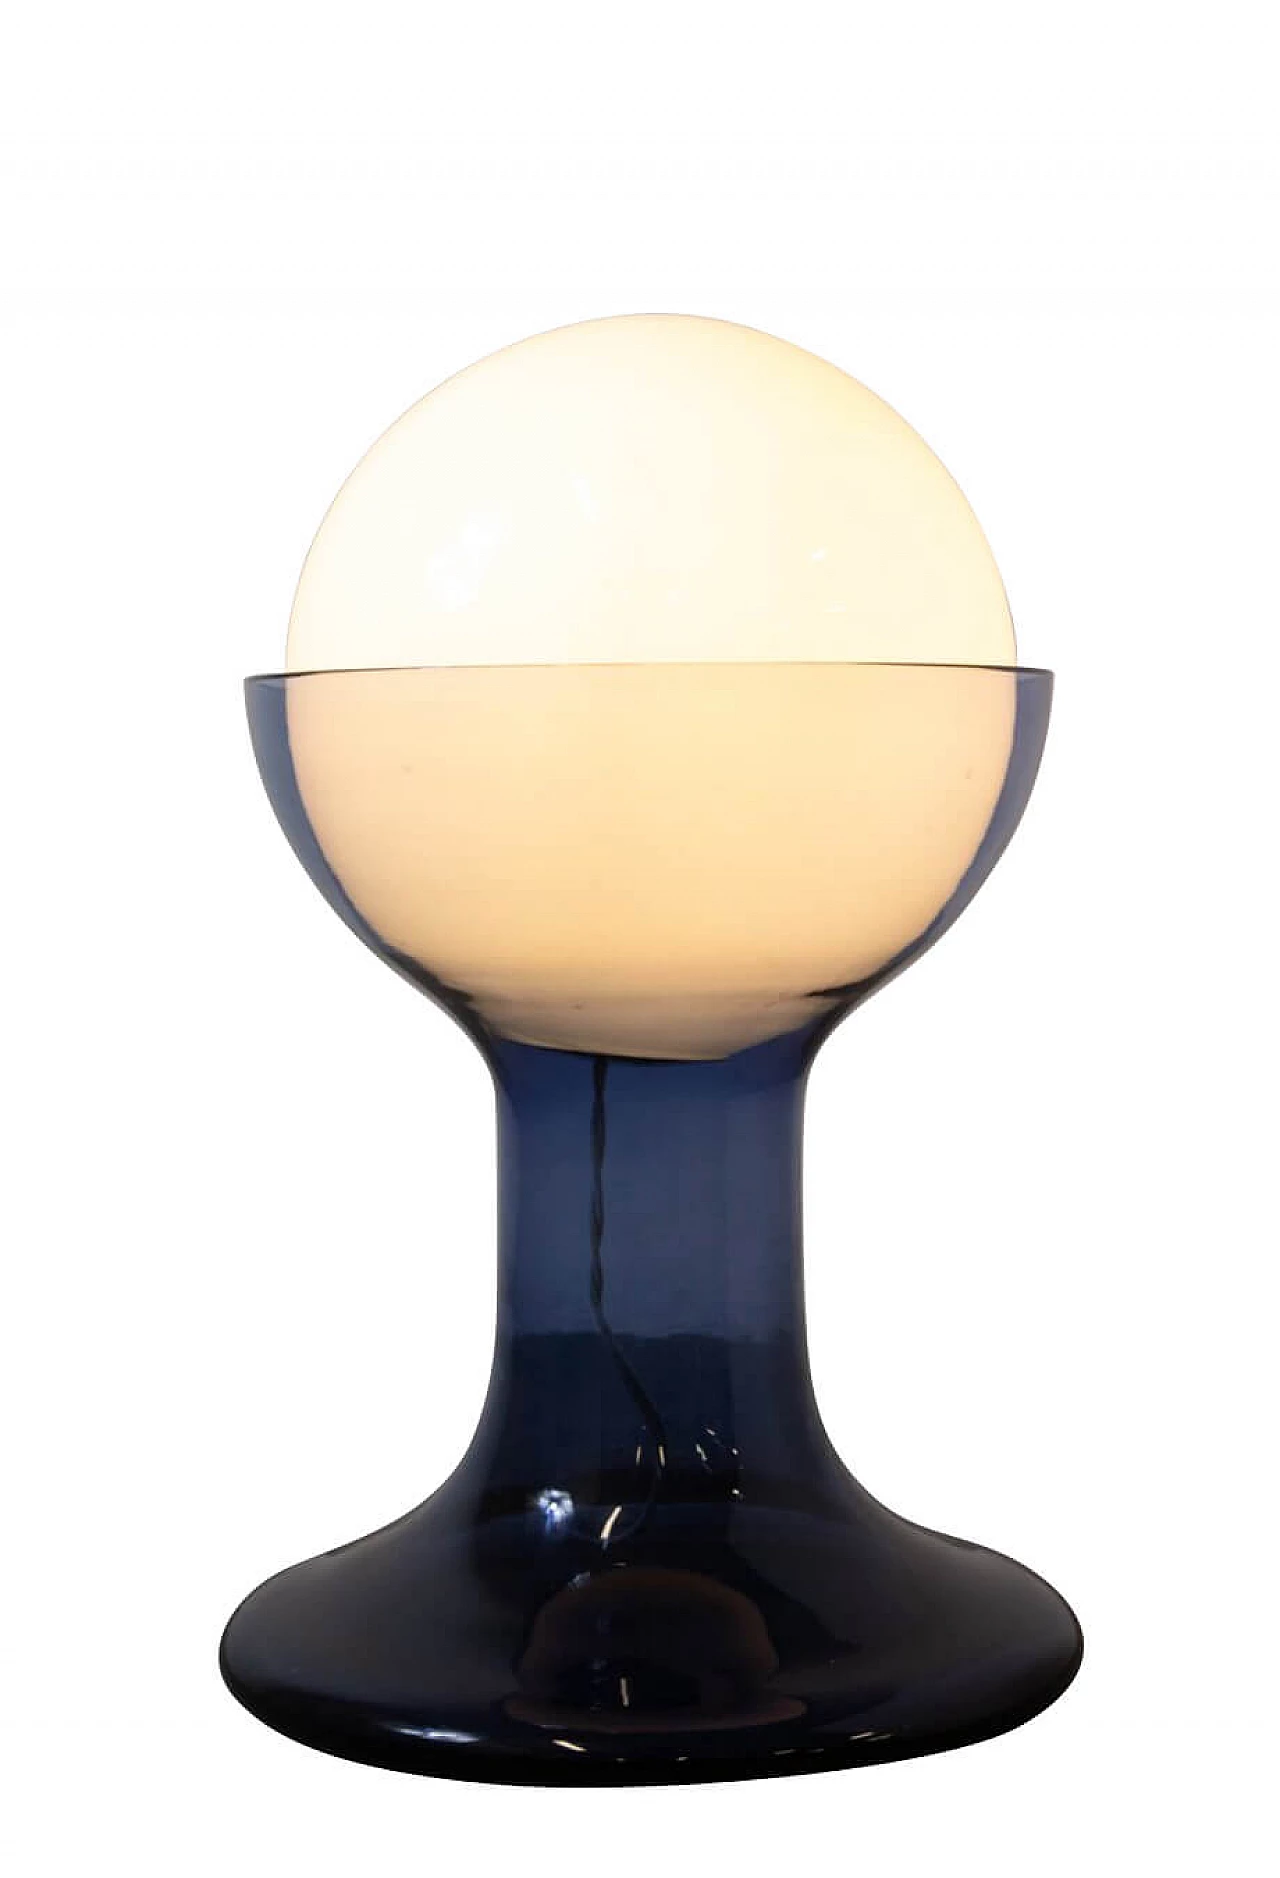 LT216 table lamp by Carlo Nason for Mazzega, 1960s 1260538